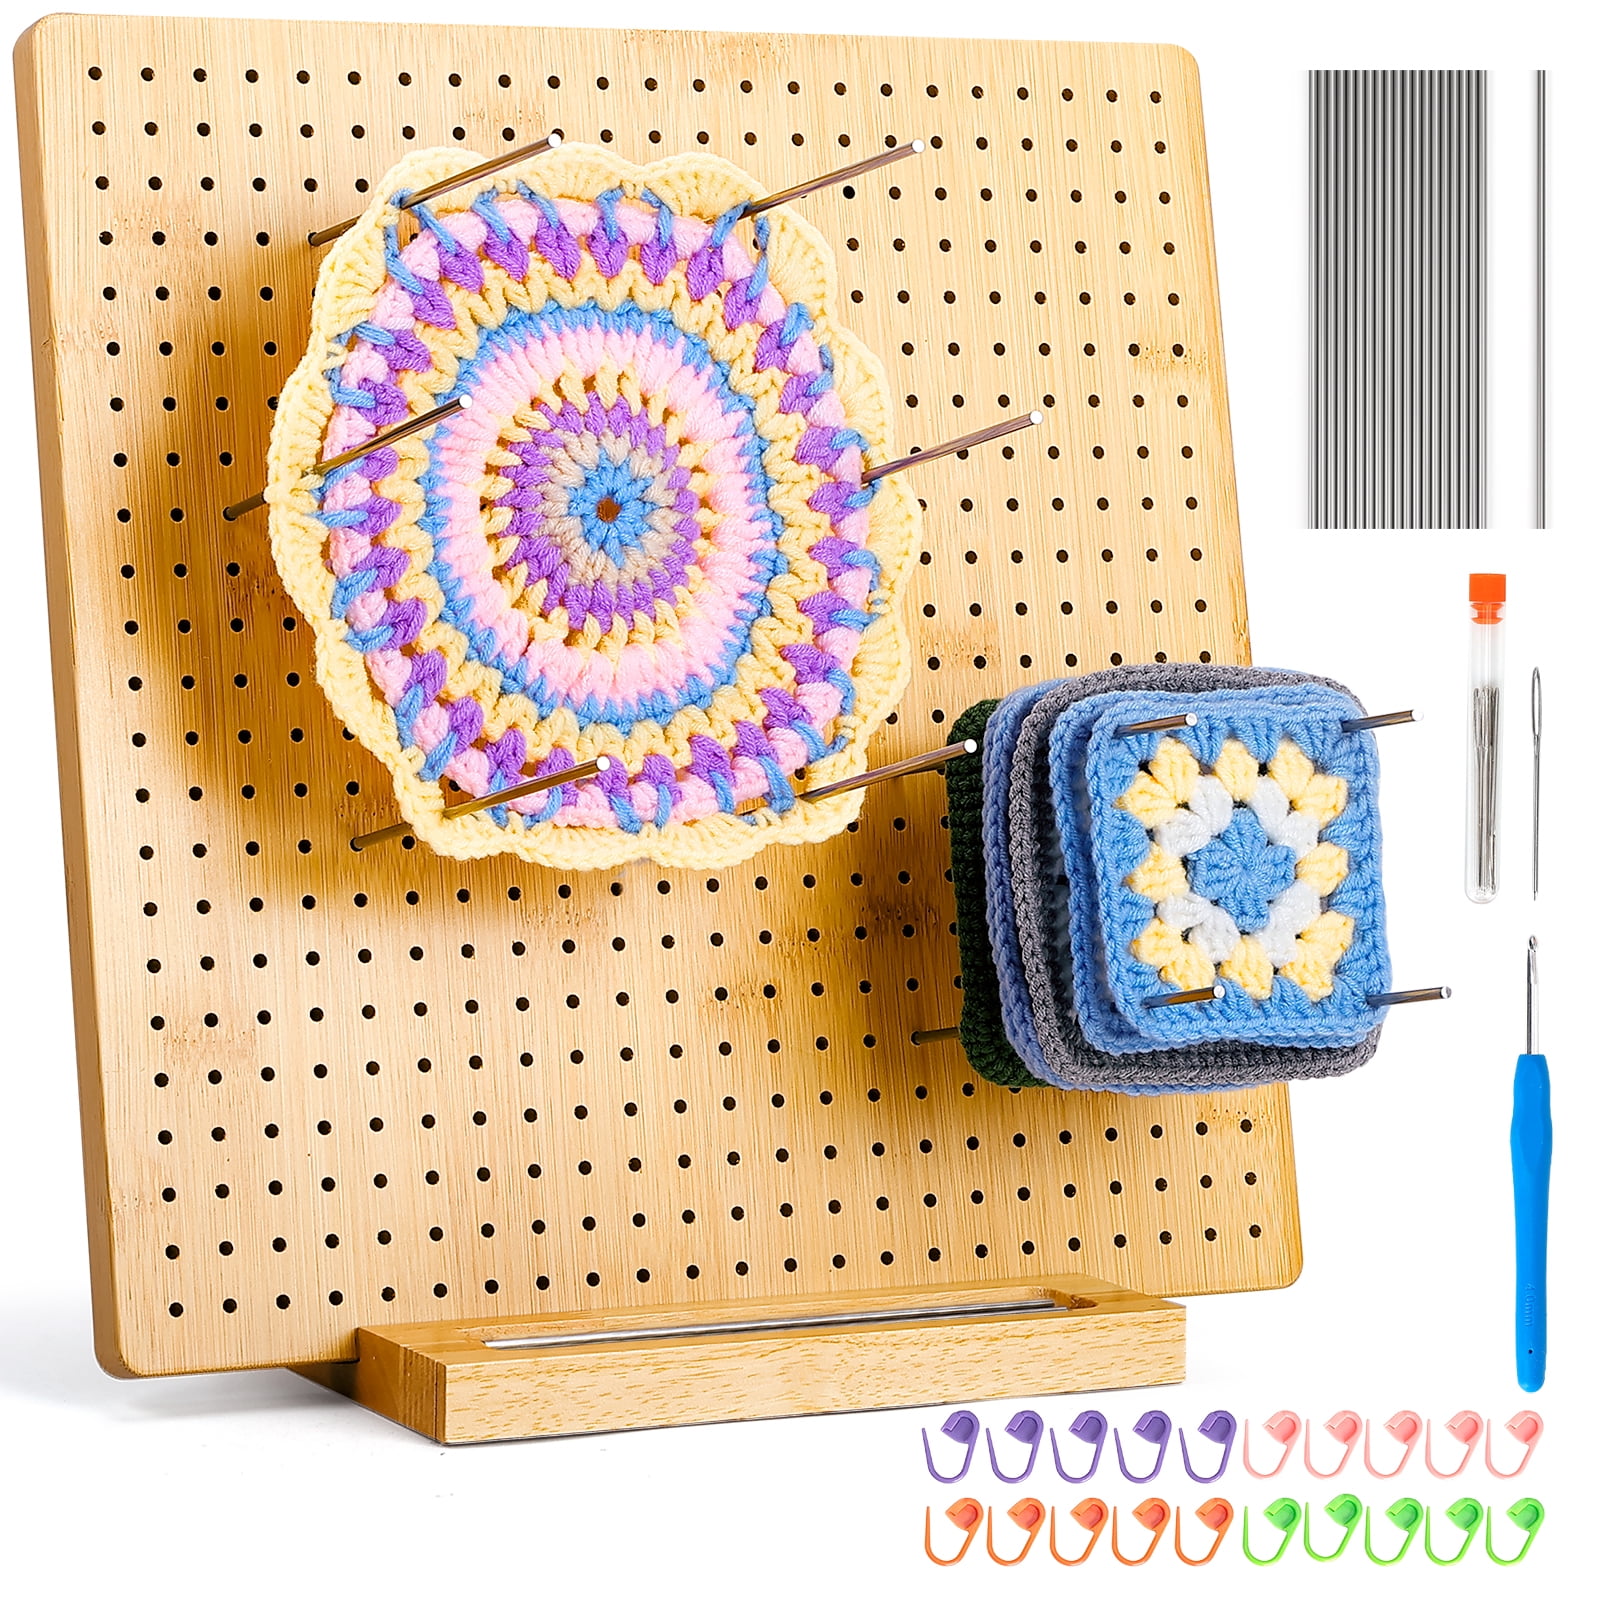 17x17 Foldable Crochet Blocking Board - Upgrade Large Blocking Board with  30 Pcs Stainless Steel Pegs, Knitting Projects Gifts for Mom, Grandmothers